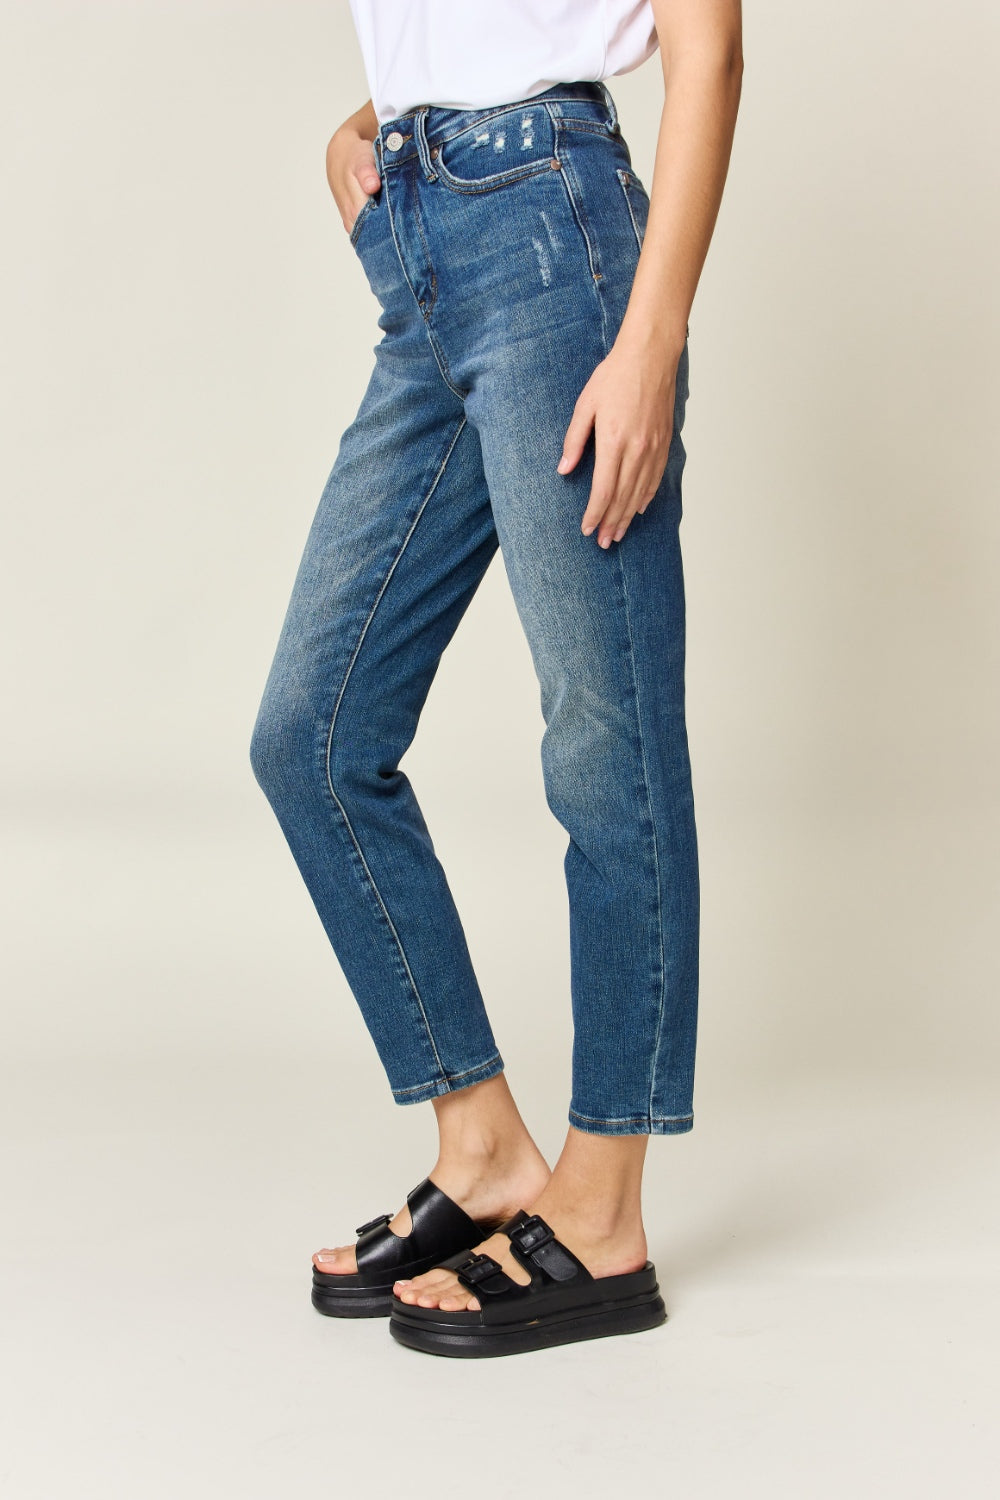 ONLINE ONLY! Judy Blue Full Size Tummy Control High Waist Slim Jeans